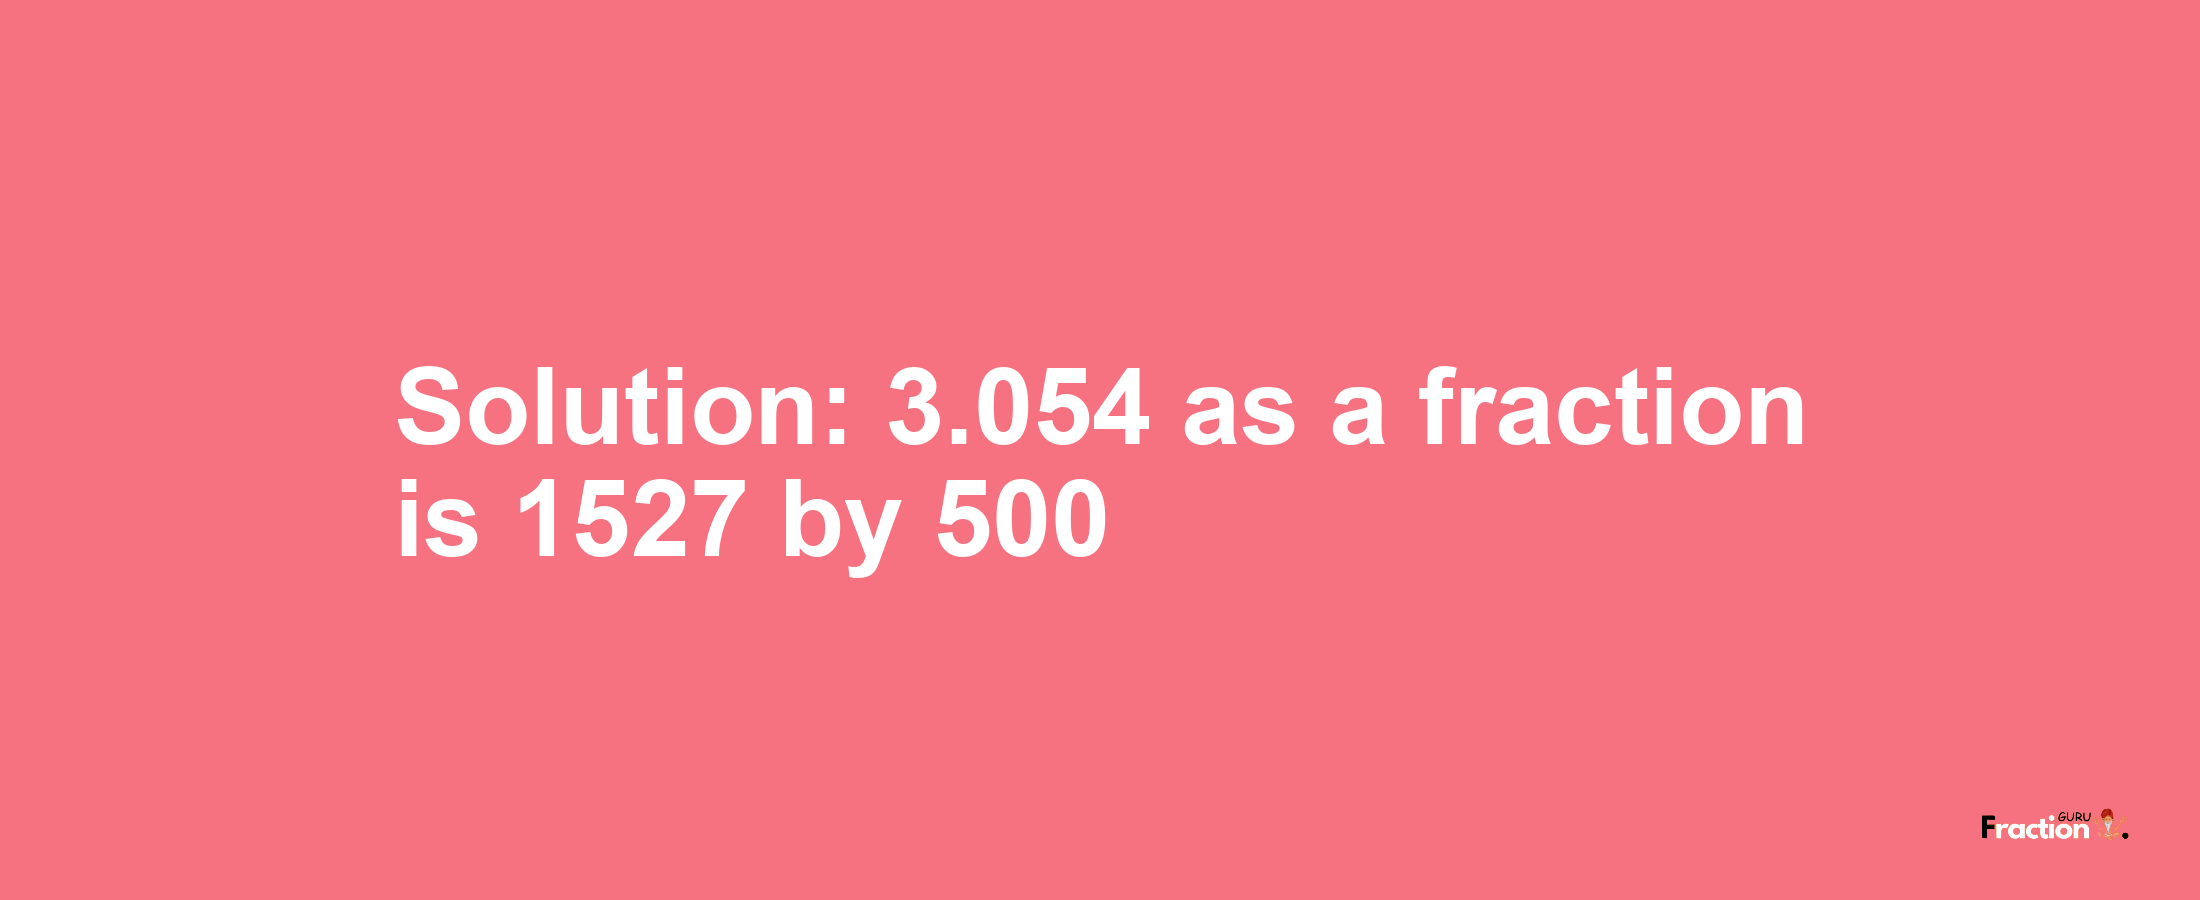 Solution:3.054 as a fraction is 1527/500